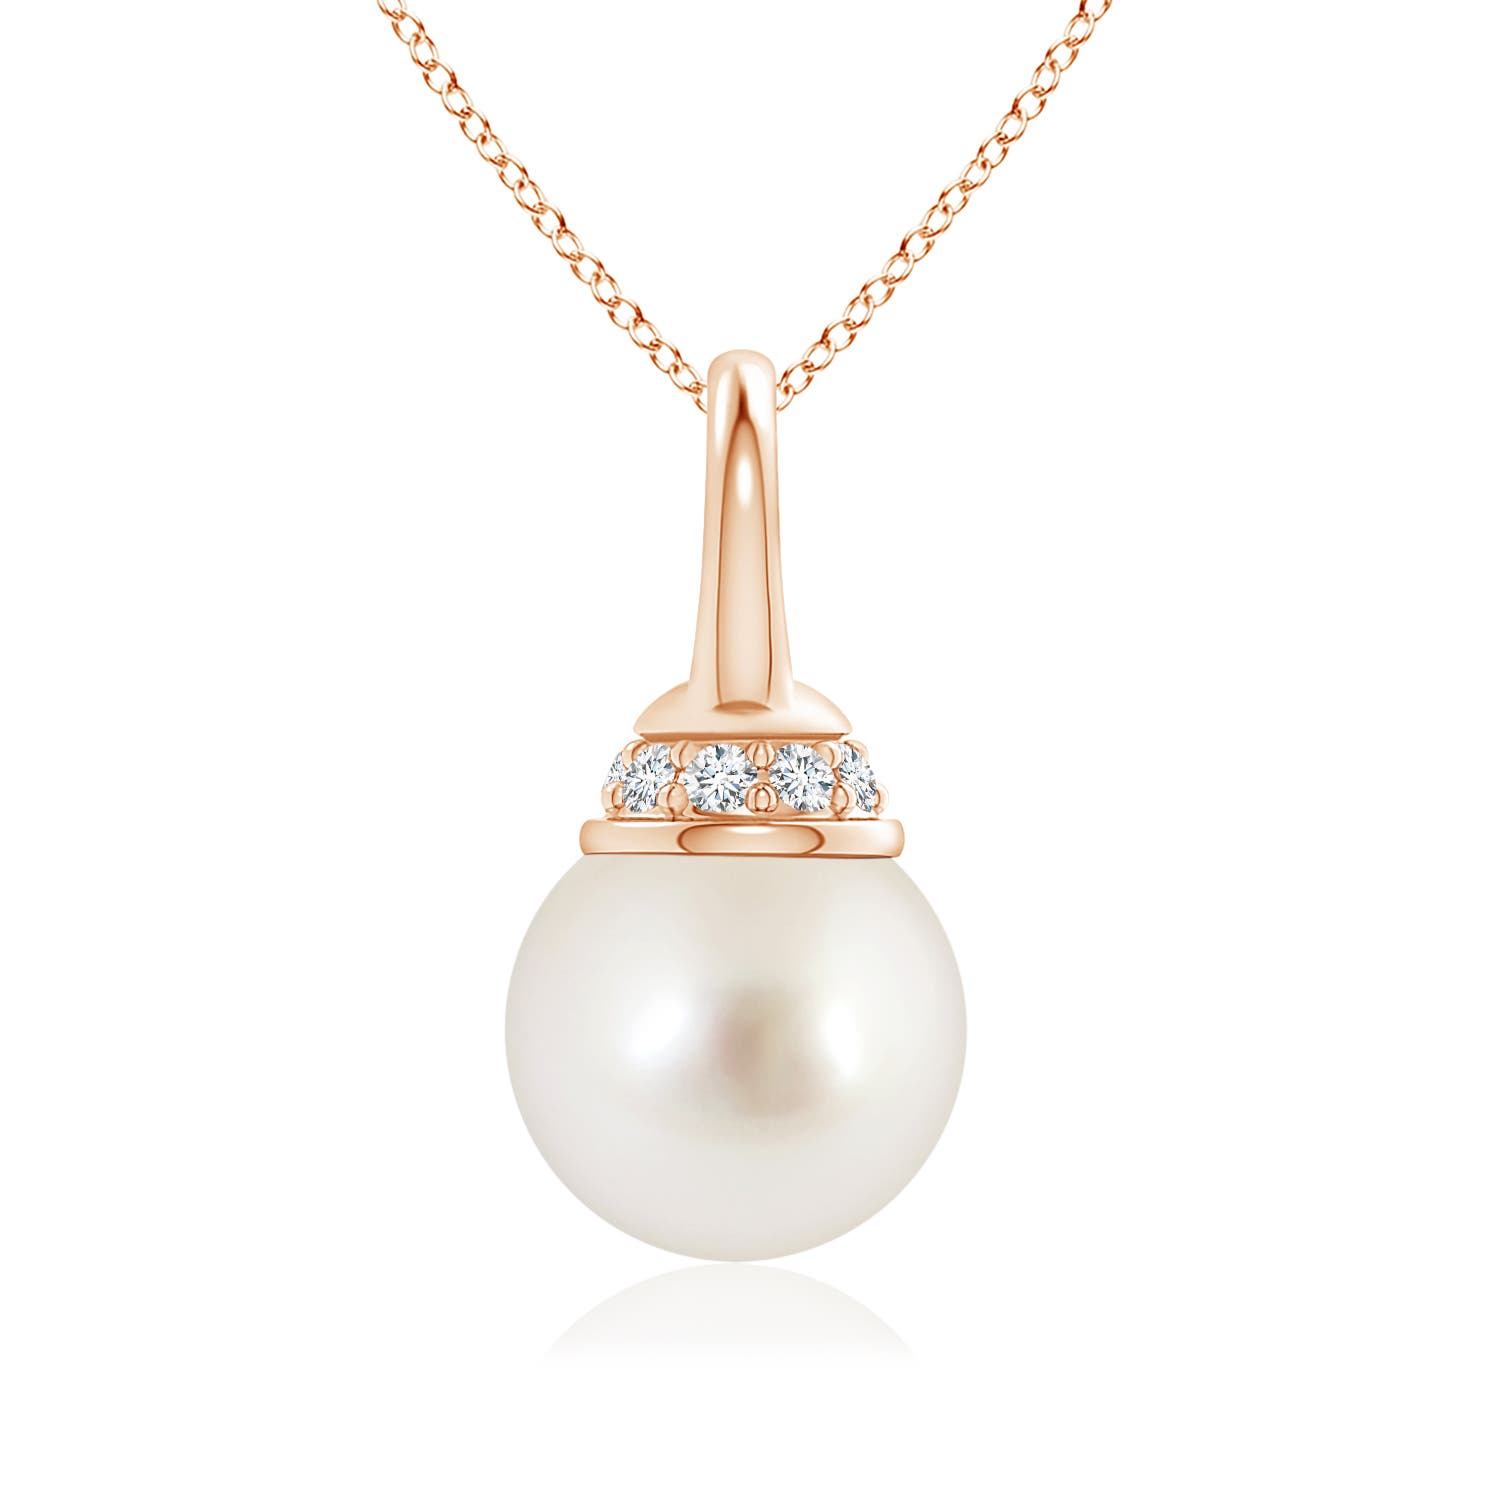 AAAA - South Sea Cultured Pearl / 3.79 CT / 14 KT Rose Gold